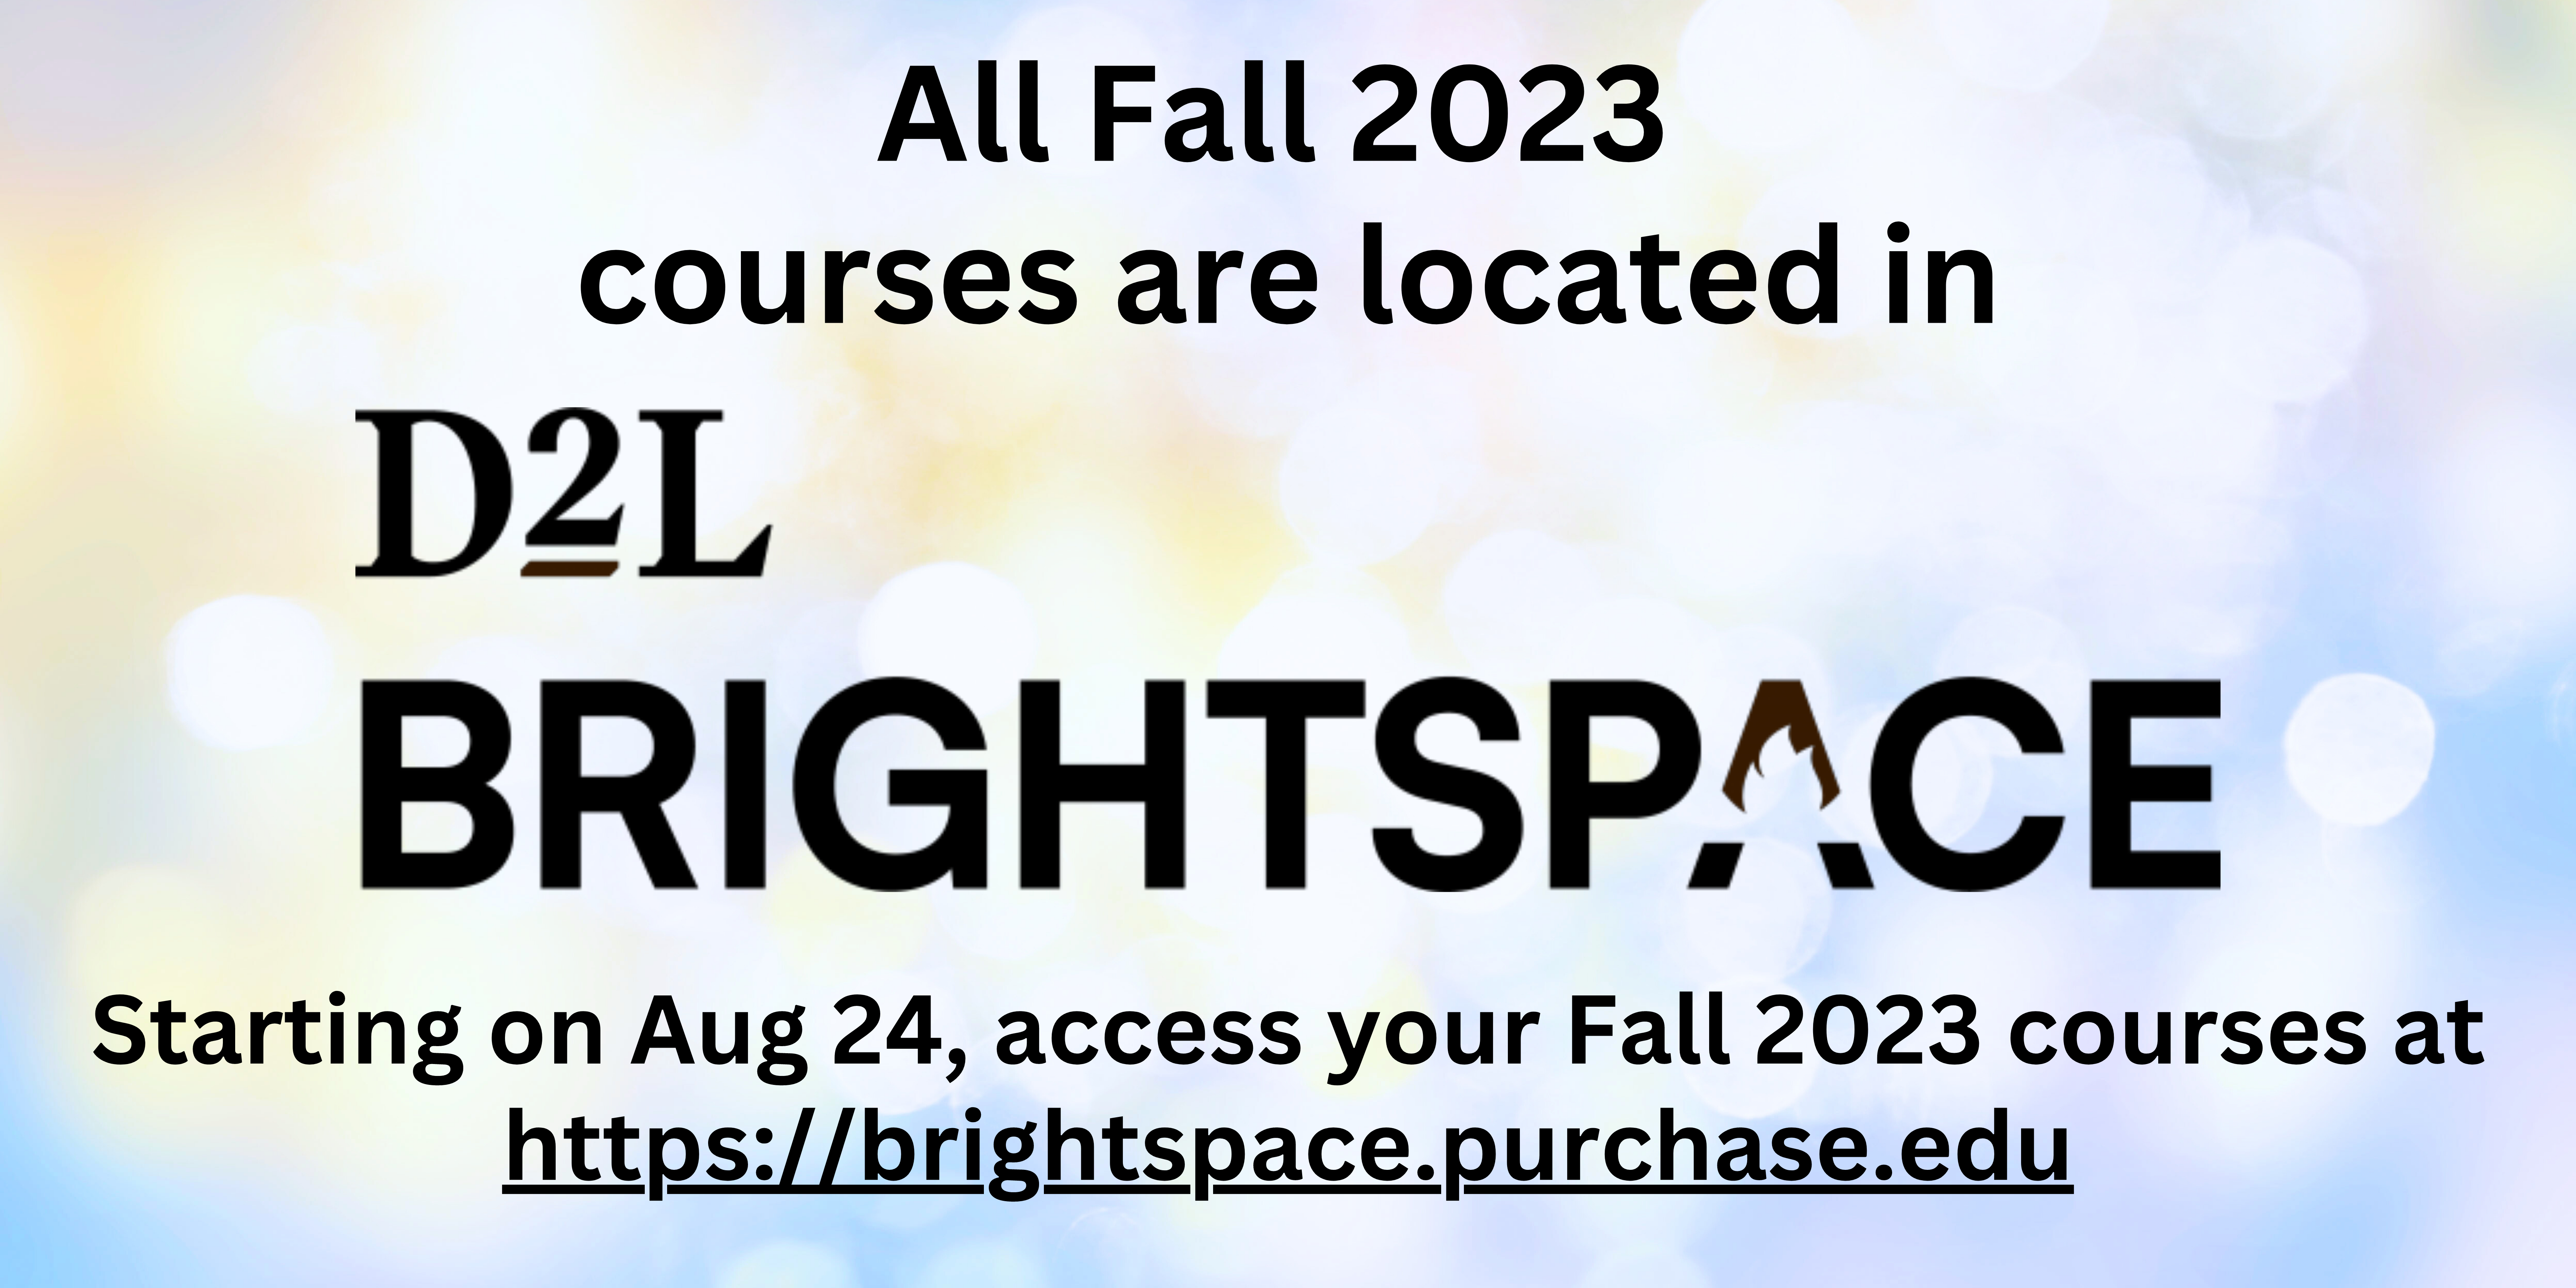 Starting on Aug 24, access your Fall 2023 courses at https://brightspace.purchase.edu